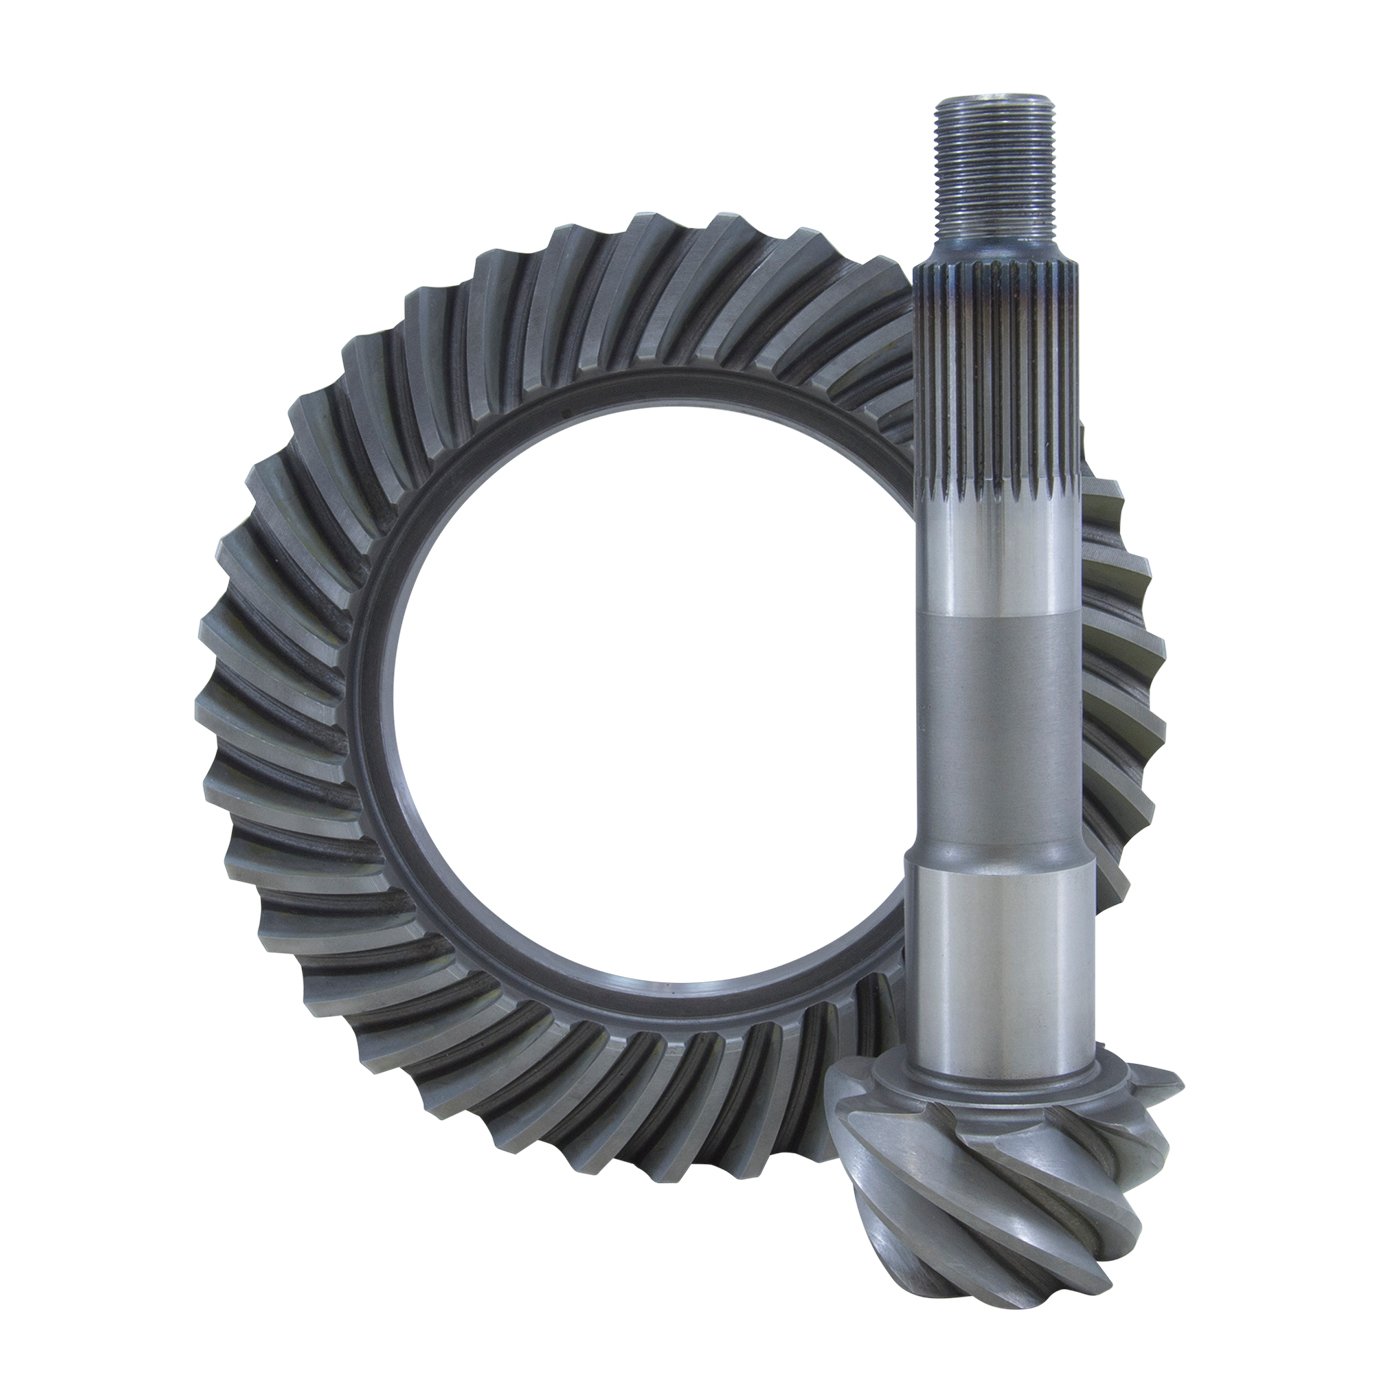 USA Standard 36355 Ring & Pinion Gear Set, For Toyota 8 in., 3.90 Ratio